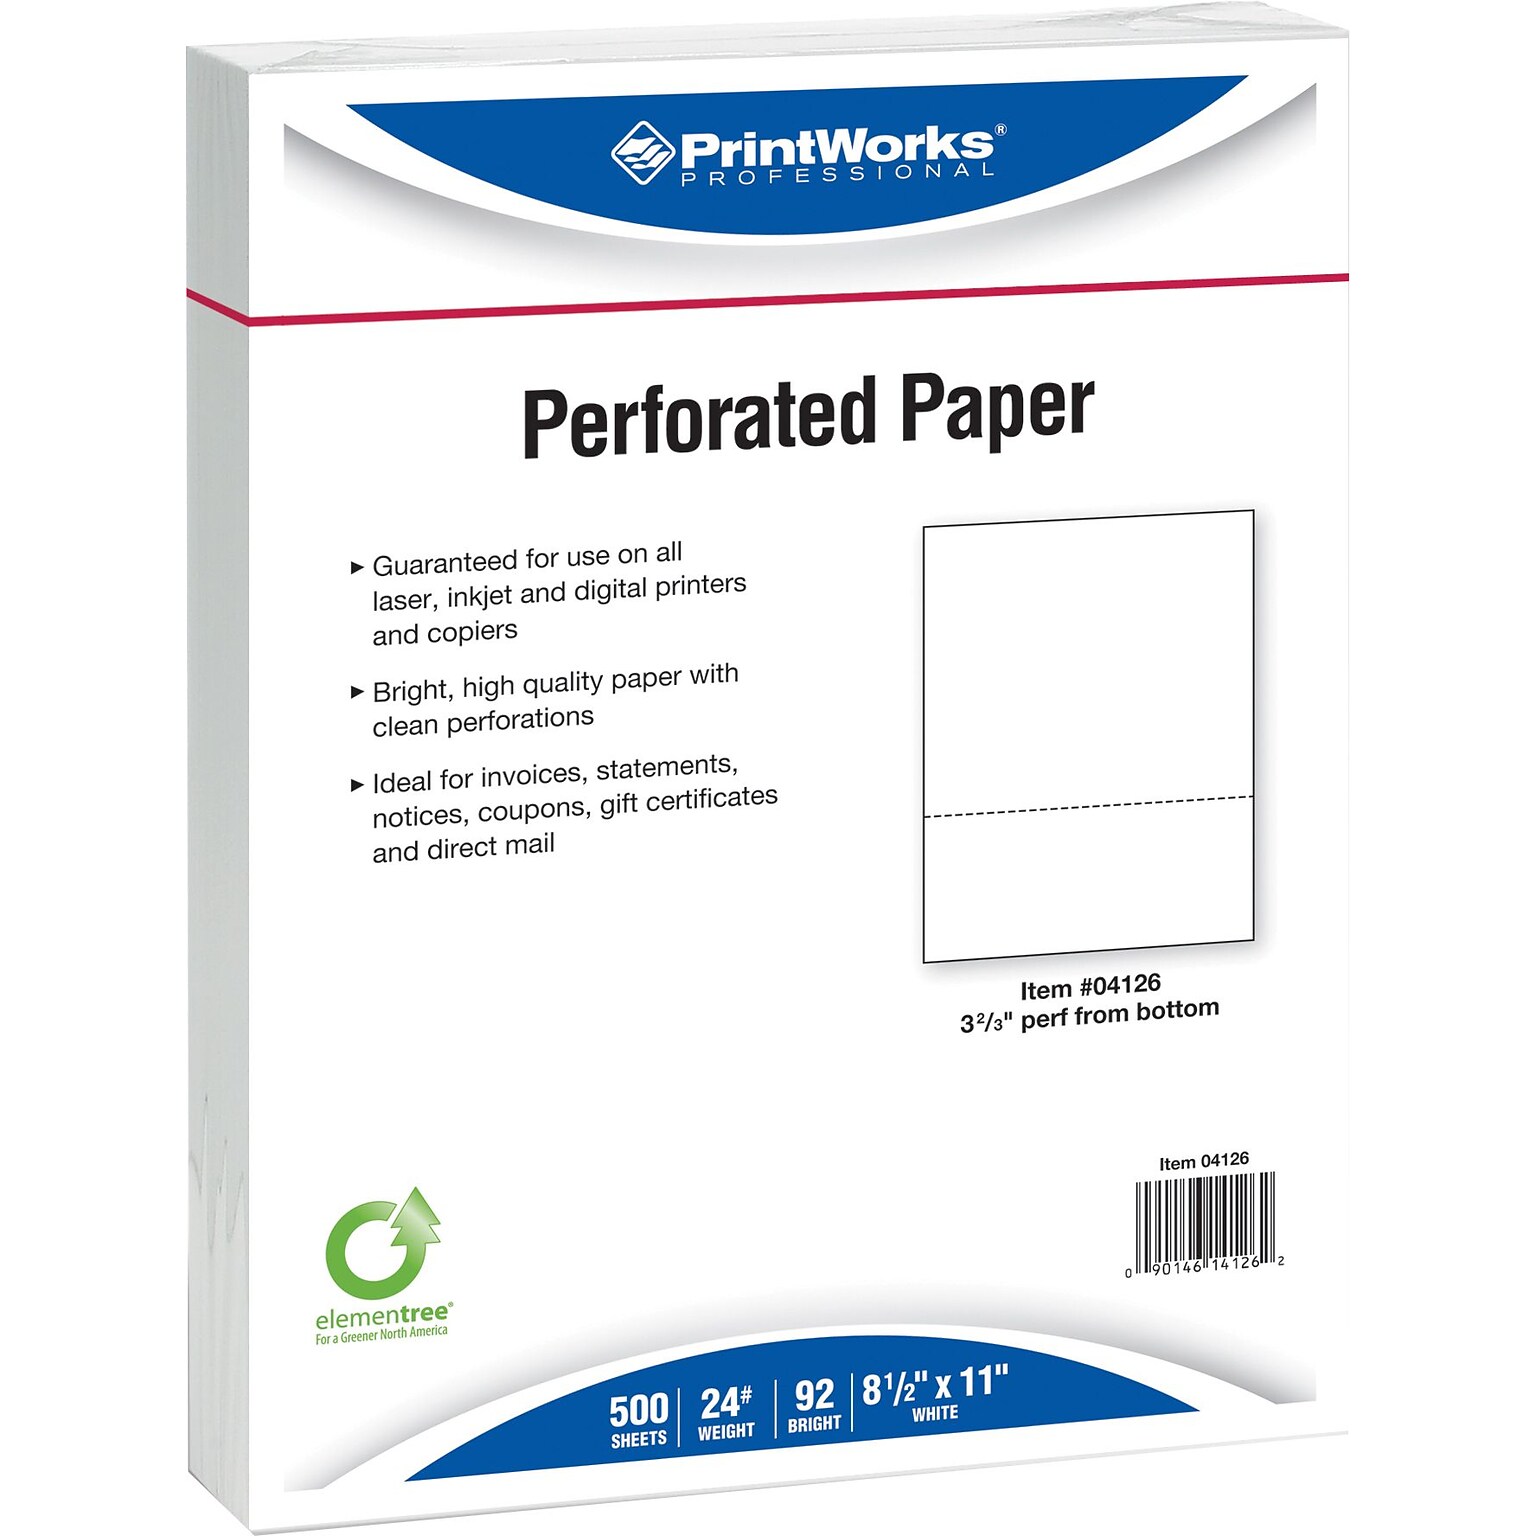 Printworks® Professional 8.5 x 11 Perforated Paper, 24 lbs., 92 Brightness, 2500 Sheets/Carton (04126)